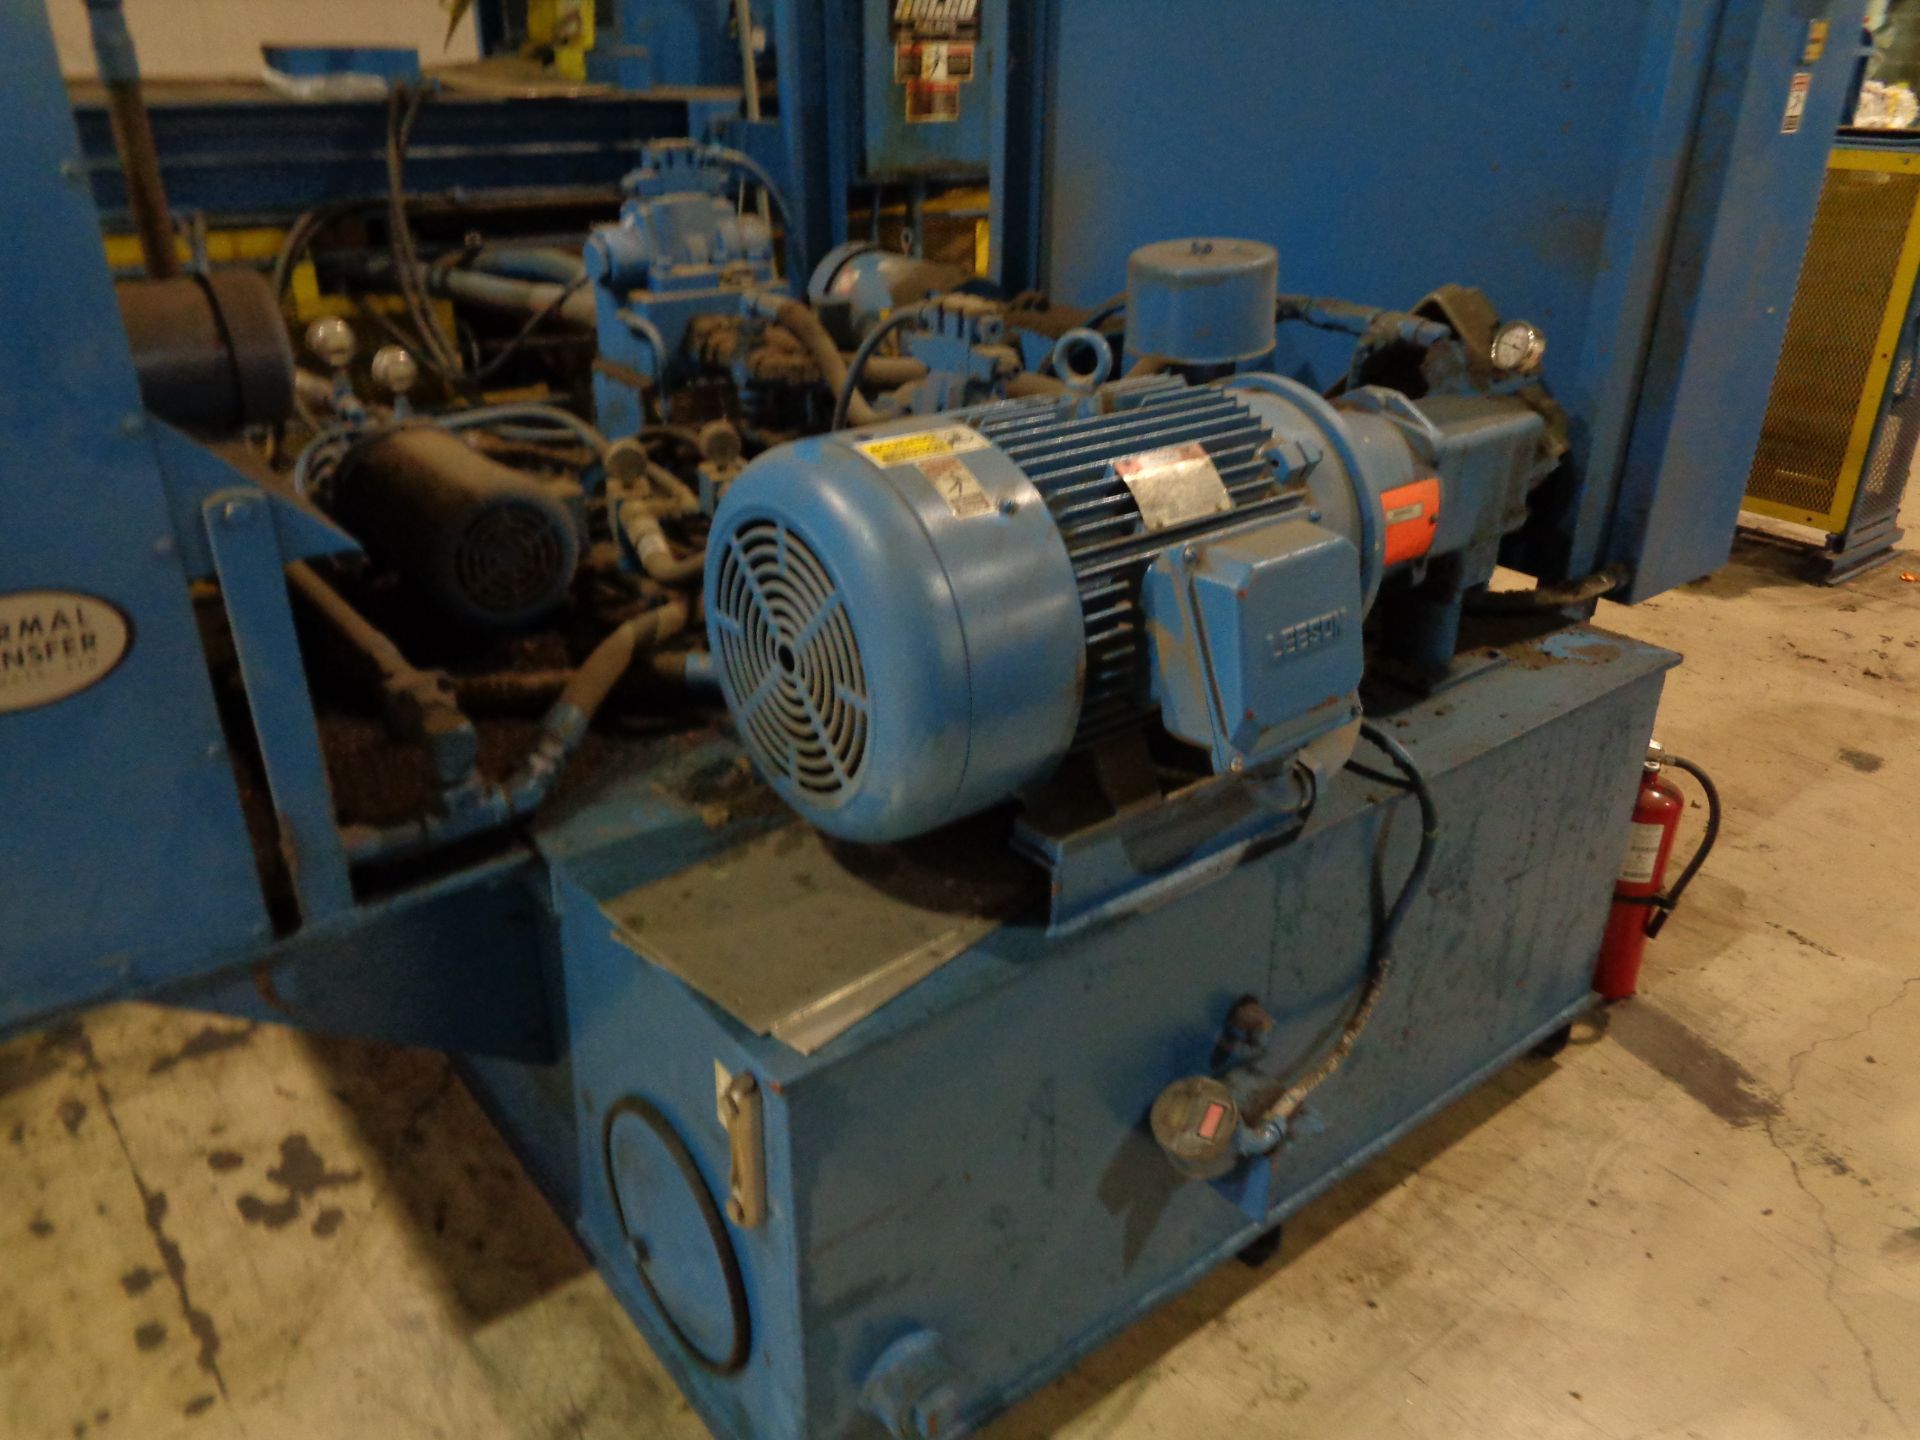 HARRIS/SELCO MODEL HLO-128AT50-NB HORIZONTAL HYDRAULIC AUTO TIE OPEN END BALER; S/N 039970245, 50 HP - Image 11 of 24